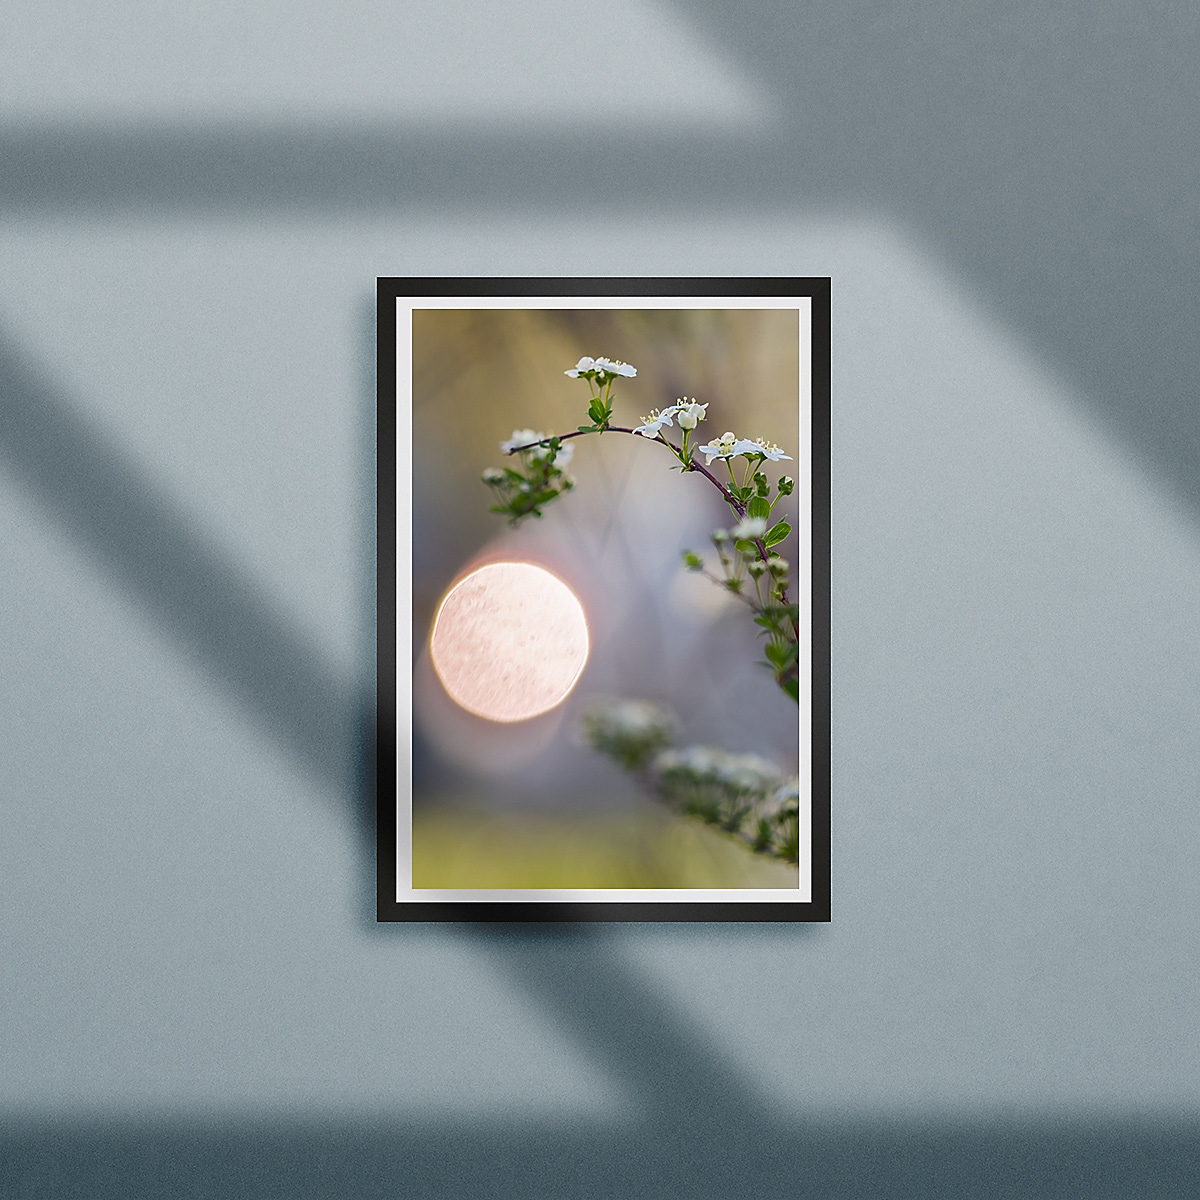 Close-up of a twig branch with flowering blooms against a backdrop of a white and yellow sun with purple and yellow hues in the sky, framed in a modern black frame with white mounting on a light grey wall with shadows of window light falling on the frame/wall.